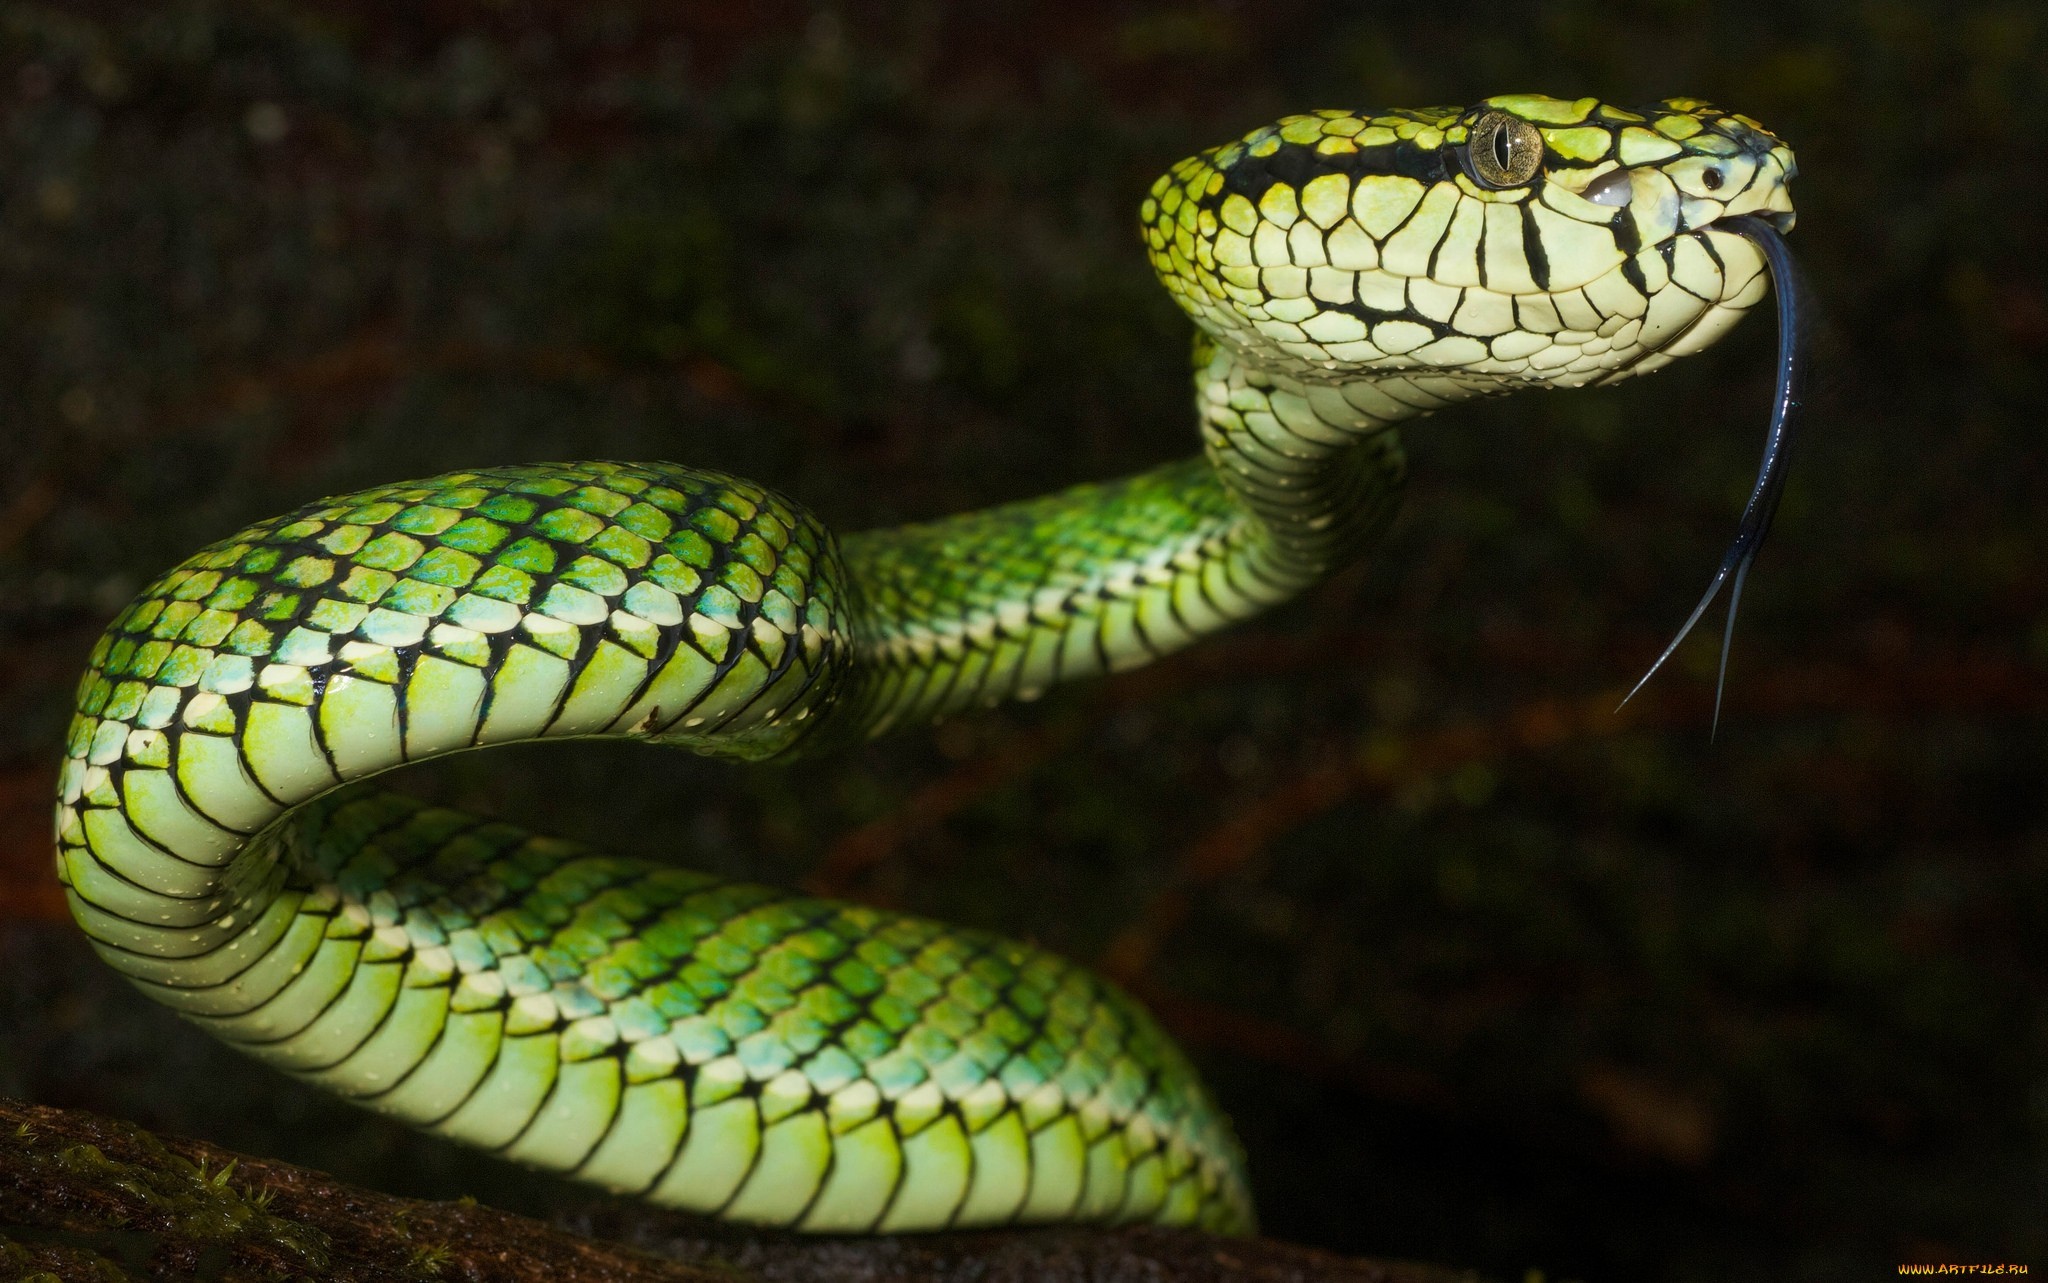 General 2048x1283 animals nature snake vipers reptiles